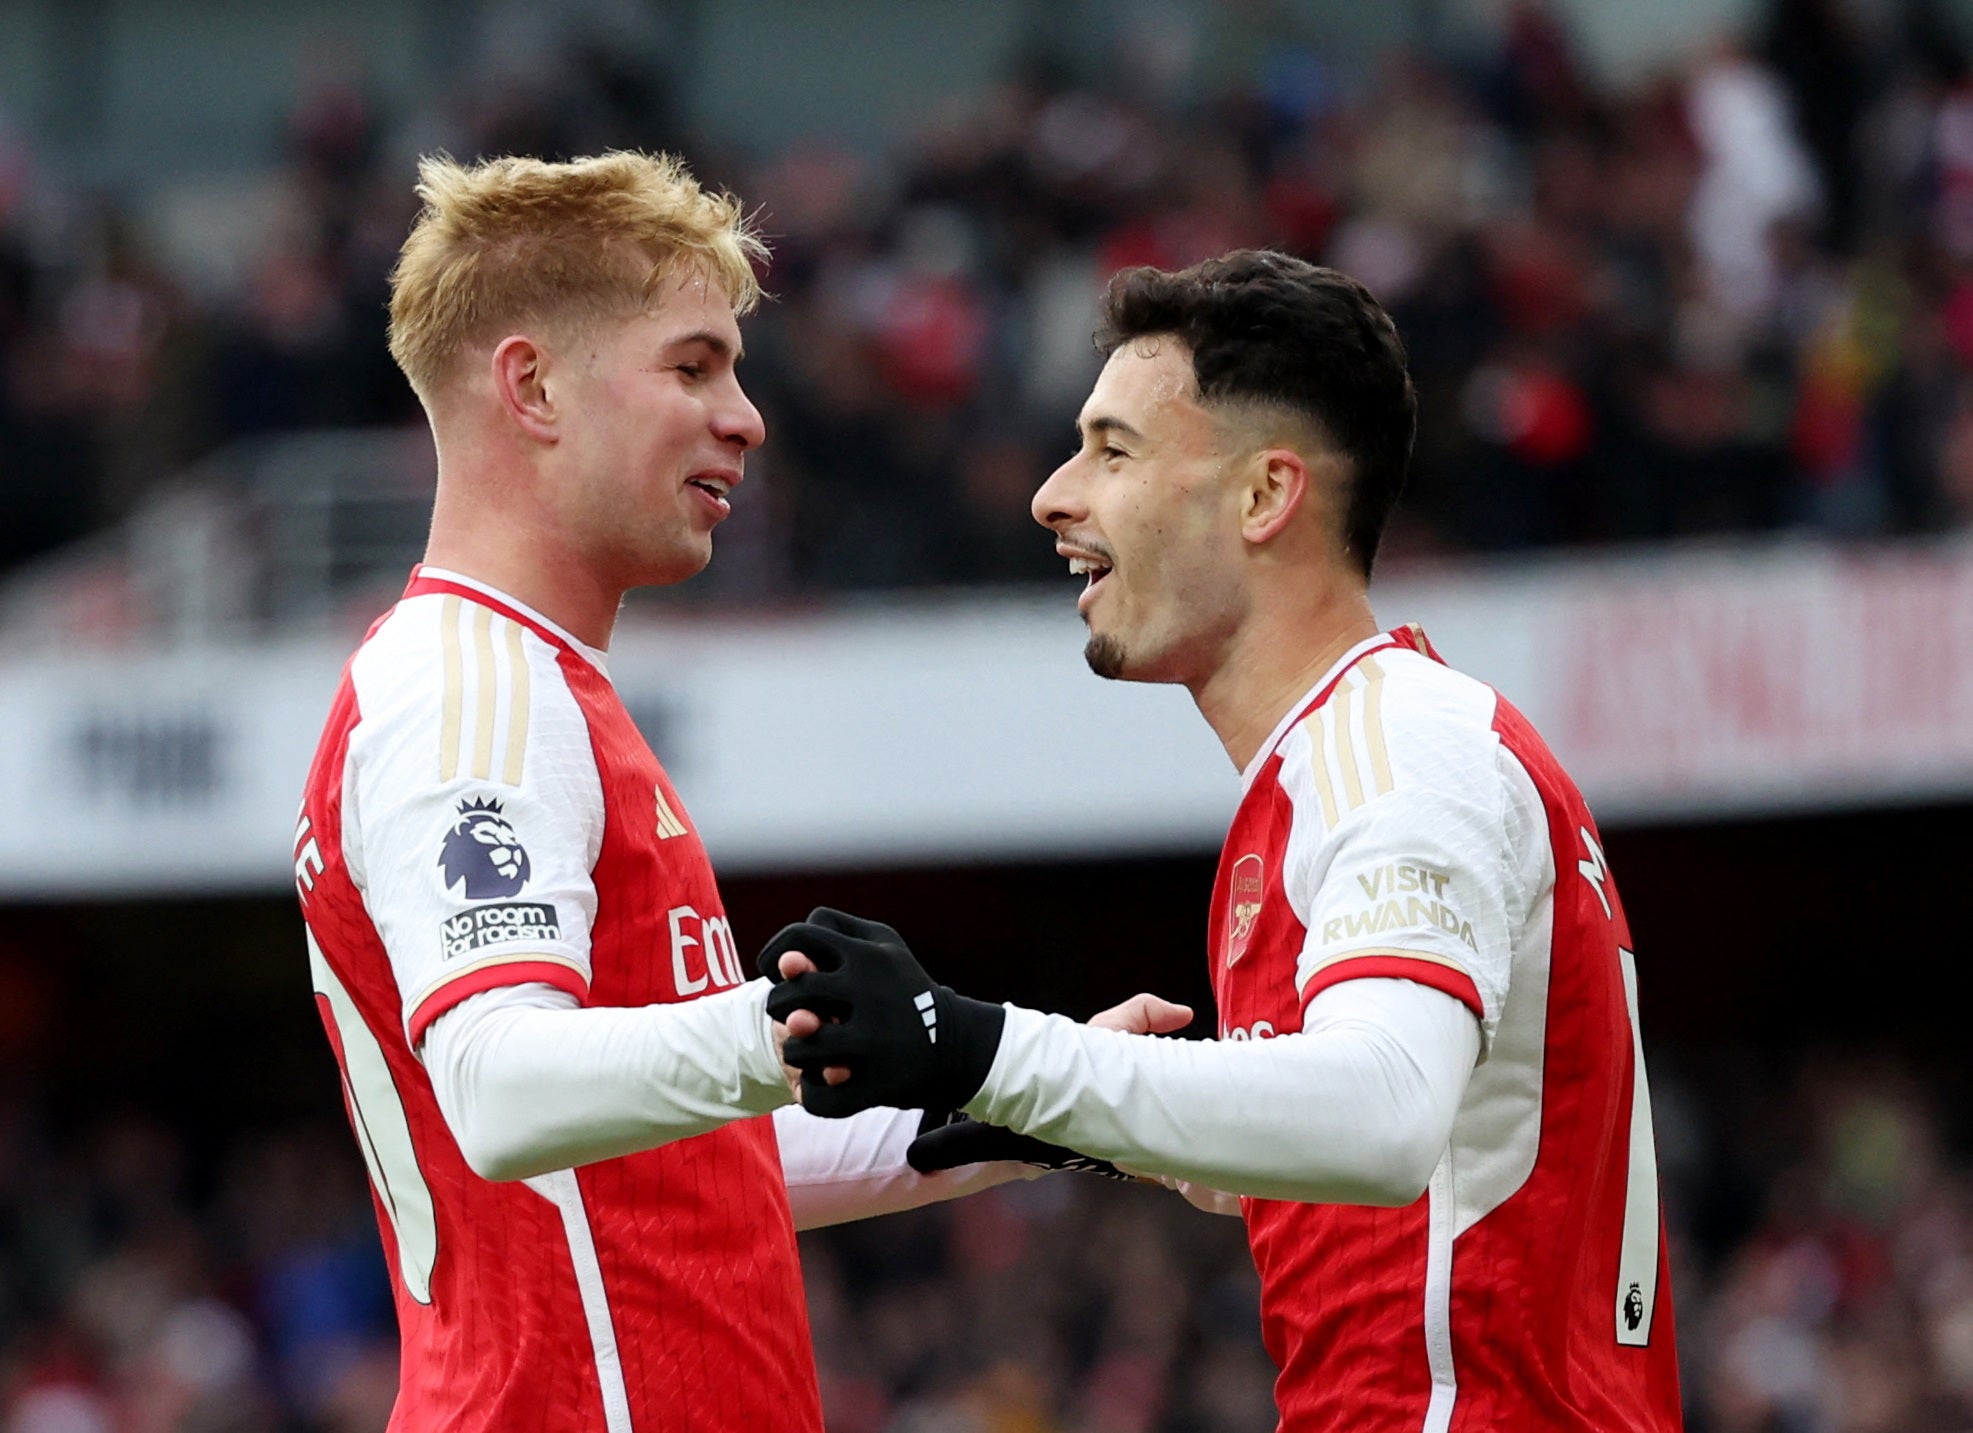 Arsenal played with freedom during their rout of Palace